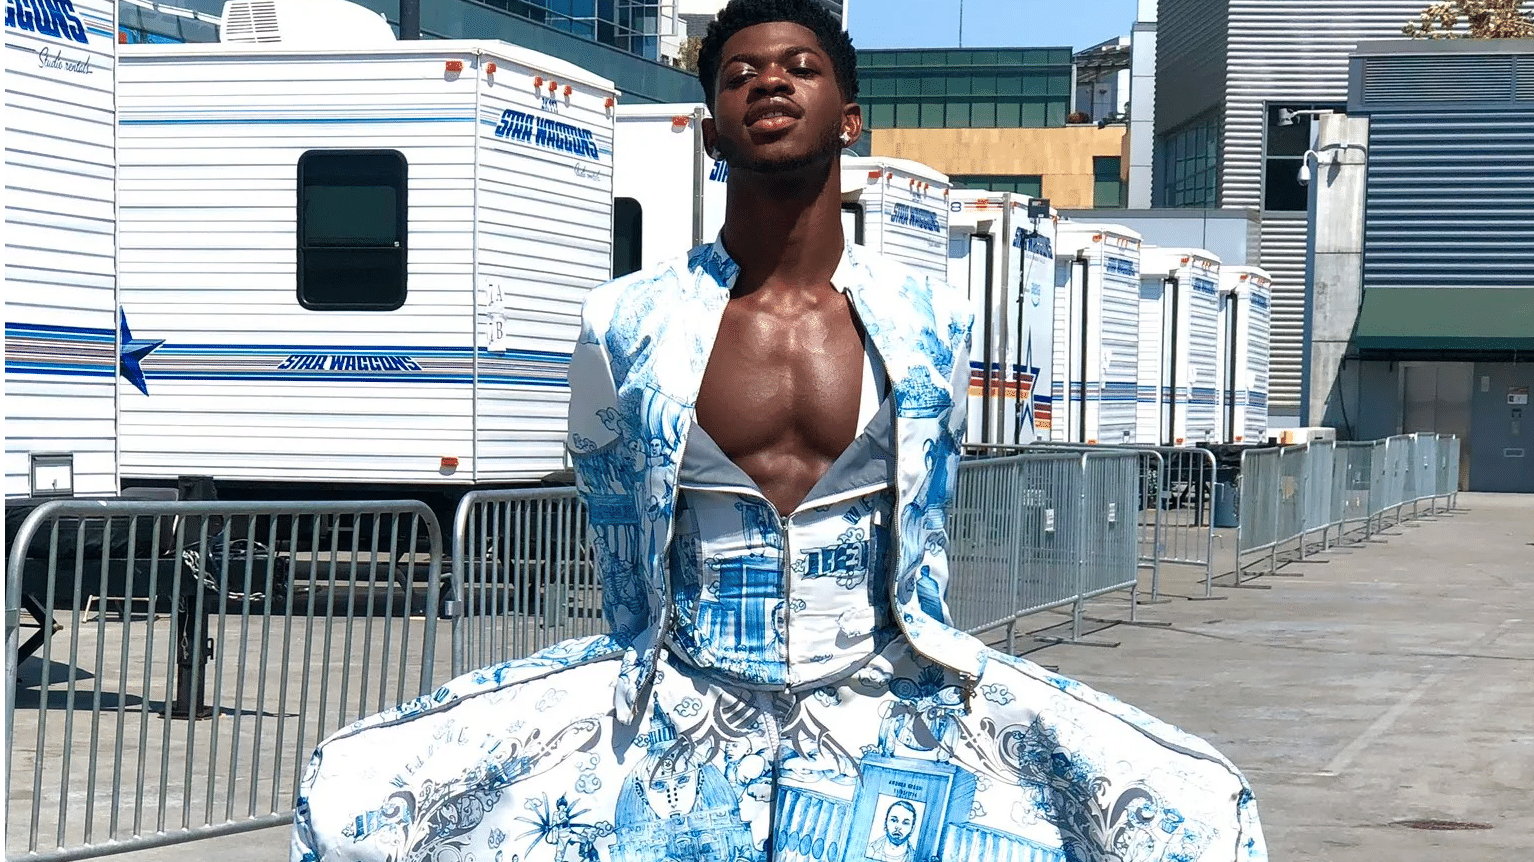 Lil Nas X takes BET Awards by storm with gender-fluid outfits. See pics